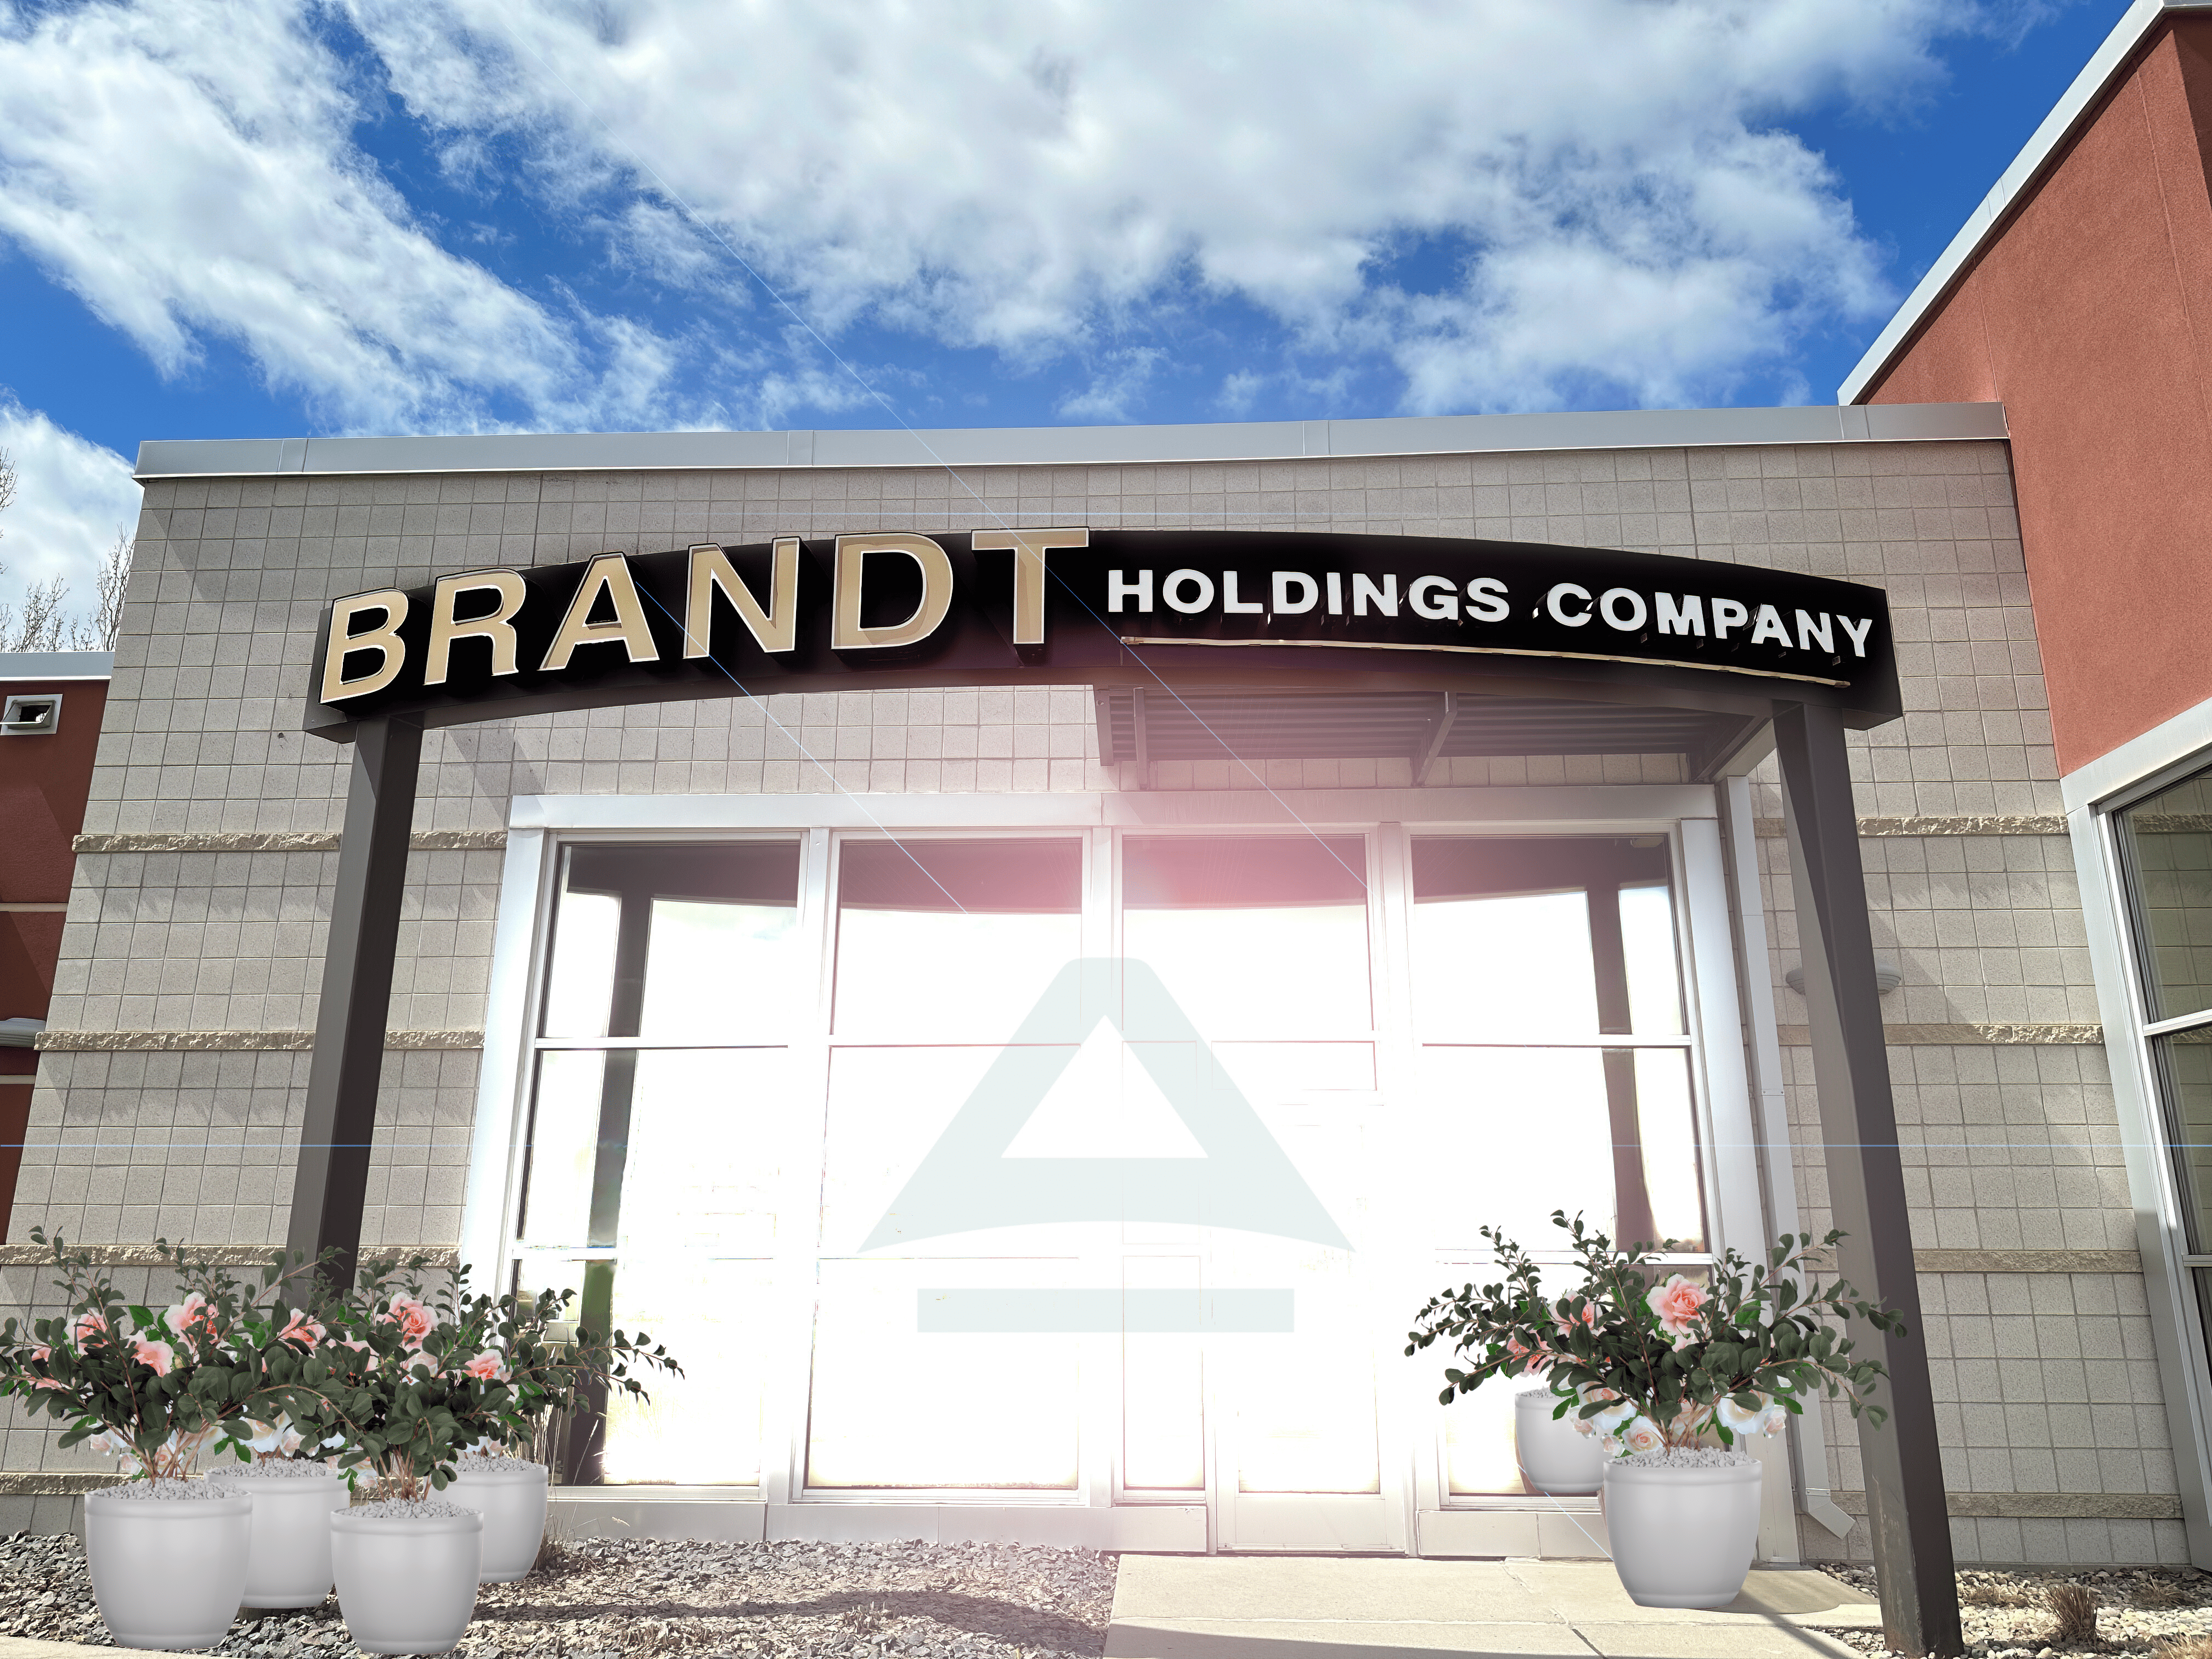 Brandt Holdings Company building front